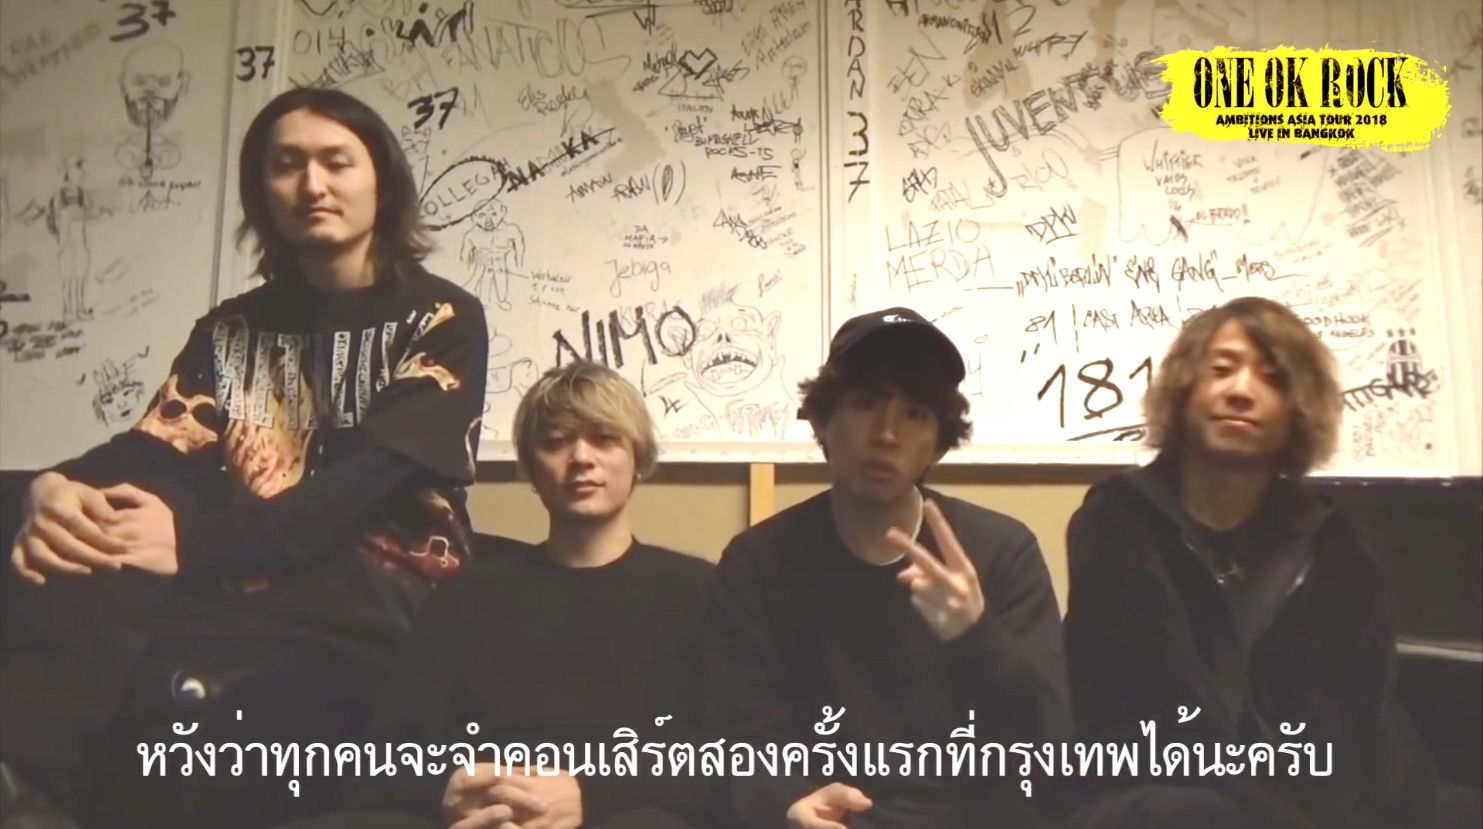 Video Message – ONE OK ROCK AMBITIONS ASIA TOUR 2018 Live in Bangkok by Avalon Live (3)